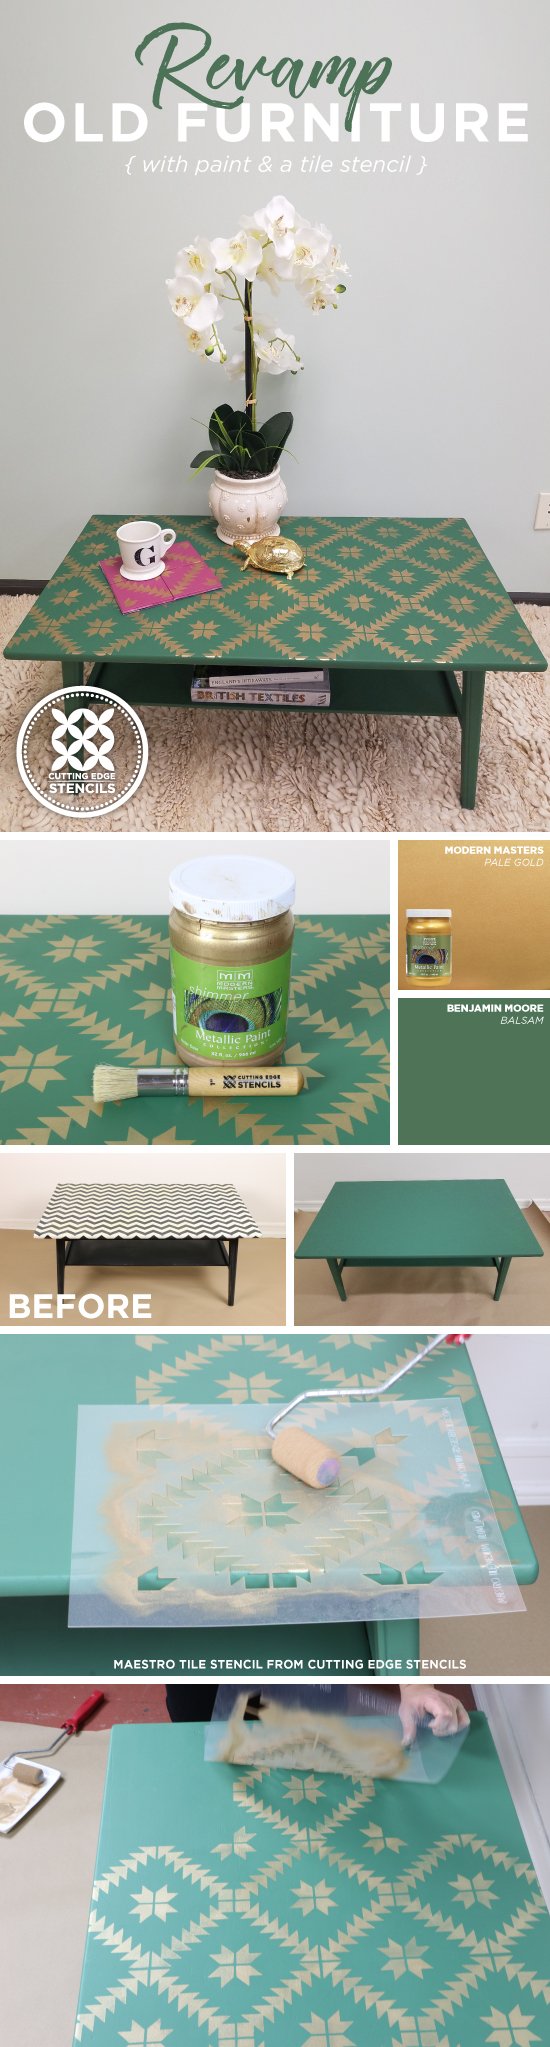 Cutting Edge Stencils shares how to makeover a coffee table using green and gold and paint along with the Maestro Tile Stencil from Cutting Edge Stencils. http://www.cuttingedgestencils.com/geometric-tile-stencil-painted-backsplash-stencils-cement-tile.html